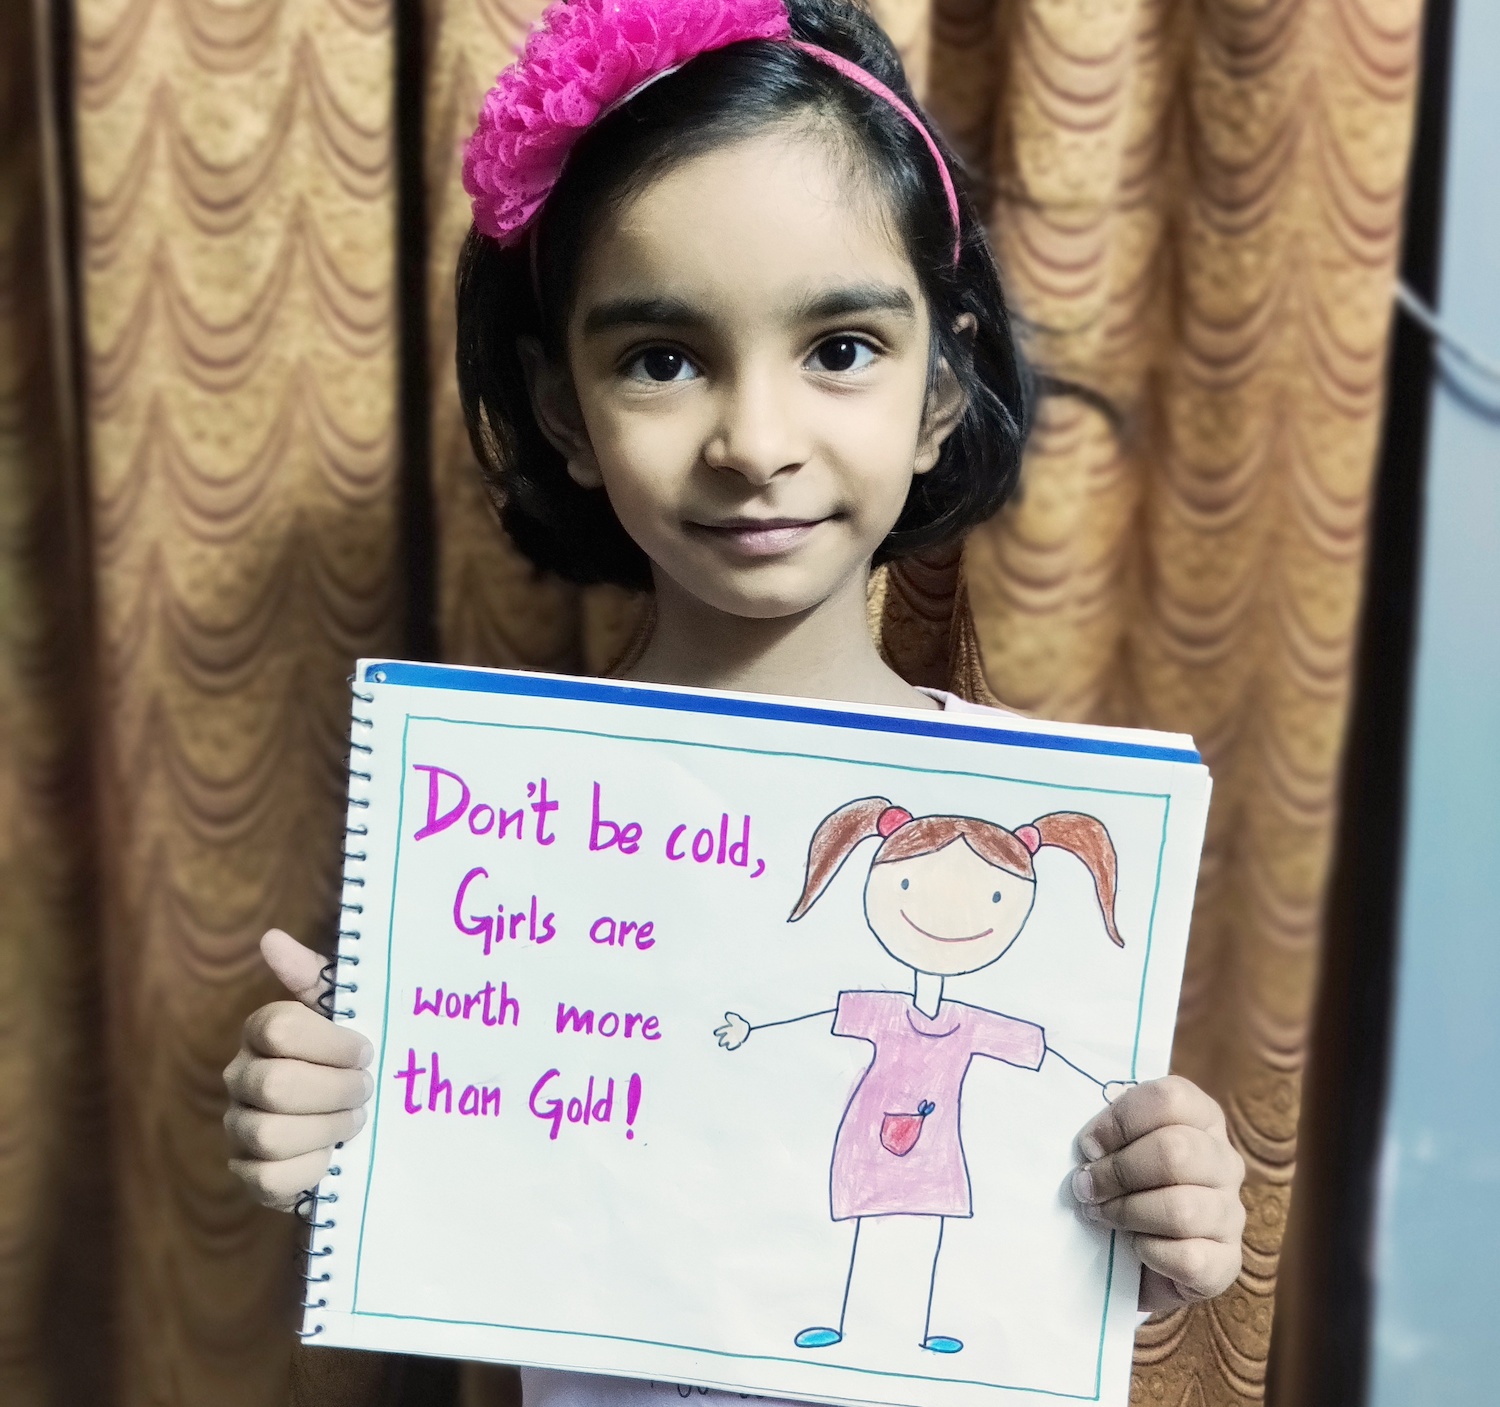 save the girl child poster drawing - YouTube